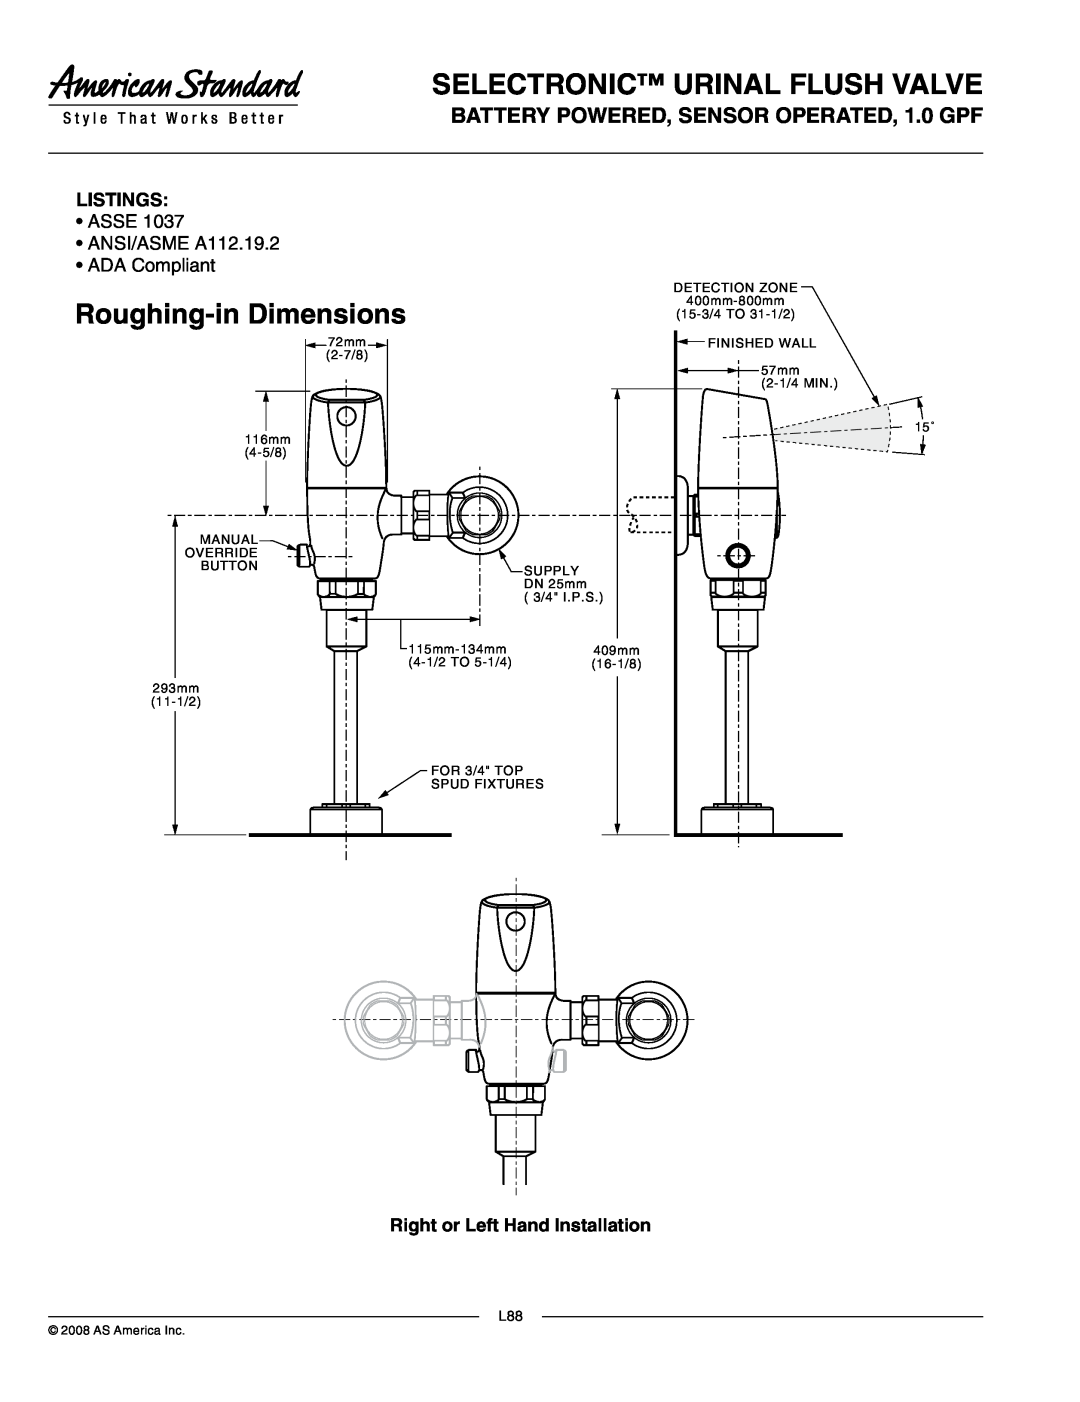 American Standard 6063510.002, 6063101.002 manual Roughing-inDimensions, Selectronic Urinal Flush Valve, Listings 